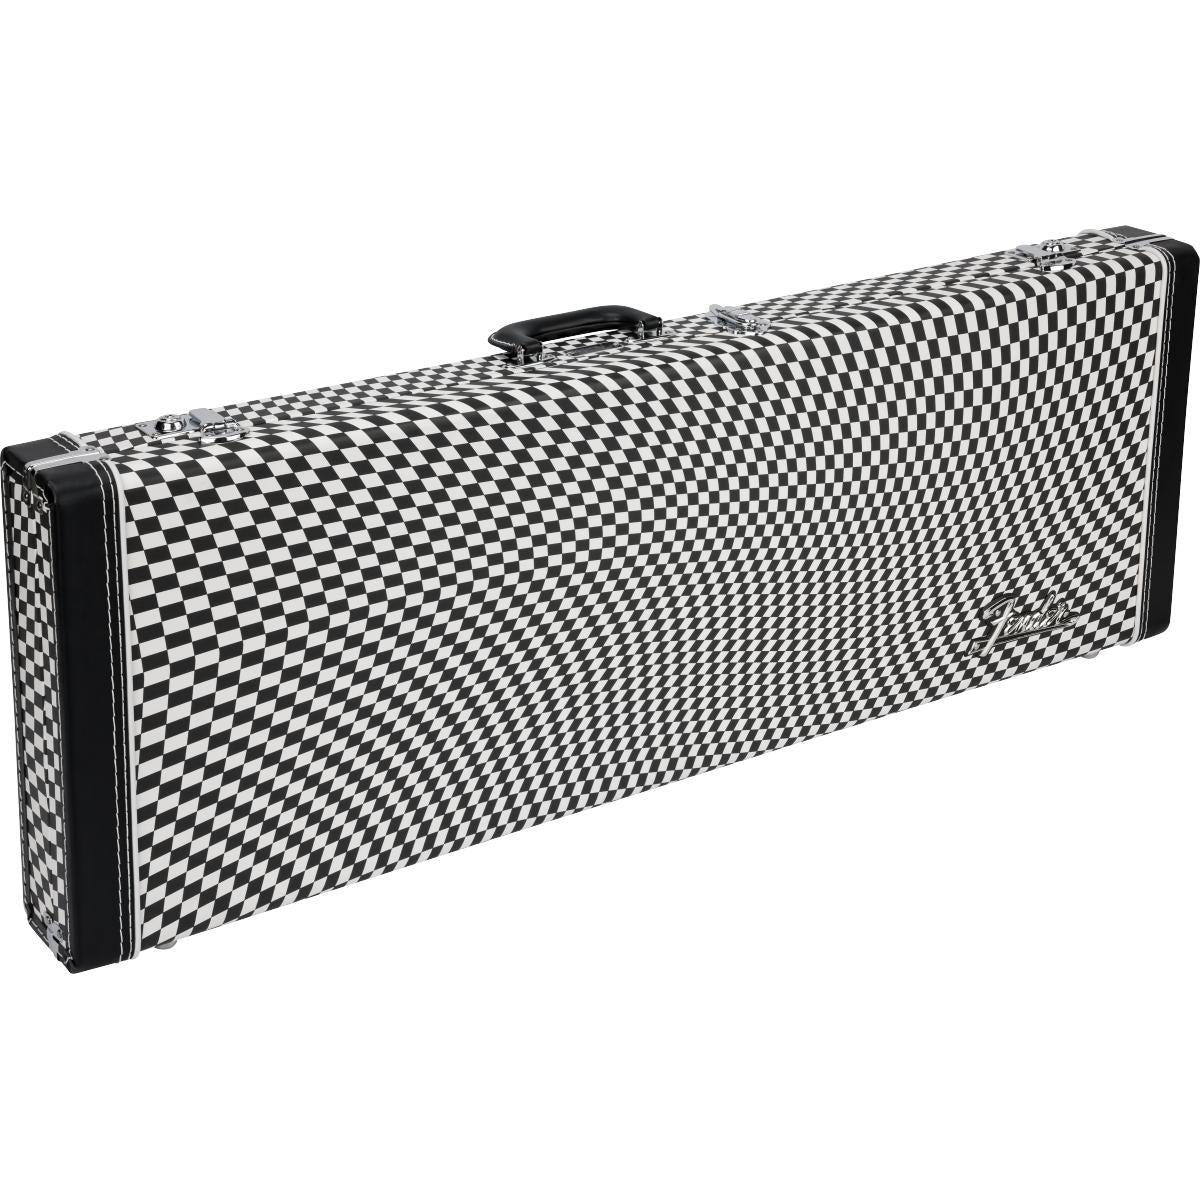 Fender Guitar Case Classic Series Wavy Checkerboard for Stratocaster/Telecaster - 0996106388